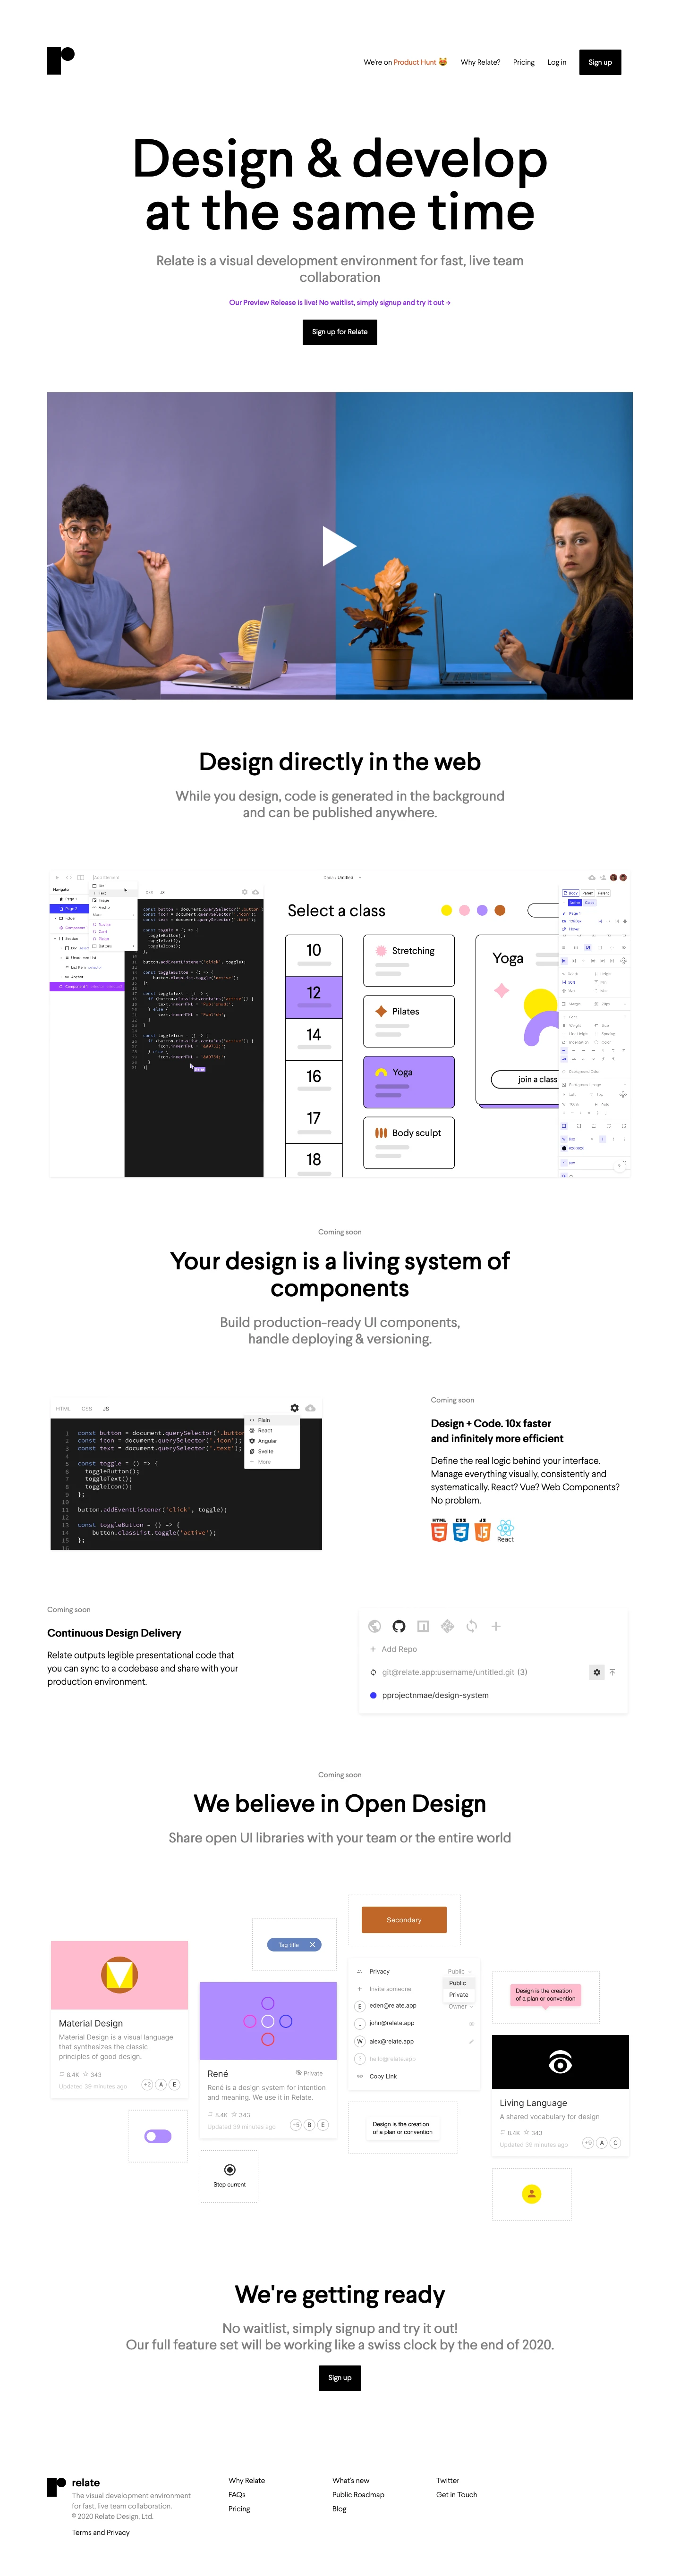 Relate Landing Page Example: Relate is the first interface design tool that empowers design and development teams to collaborate in the creation of digital products - visually and straightforwardly